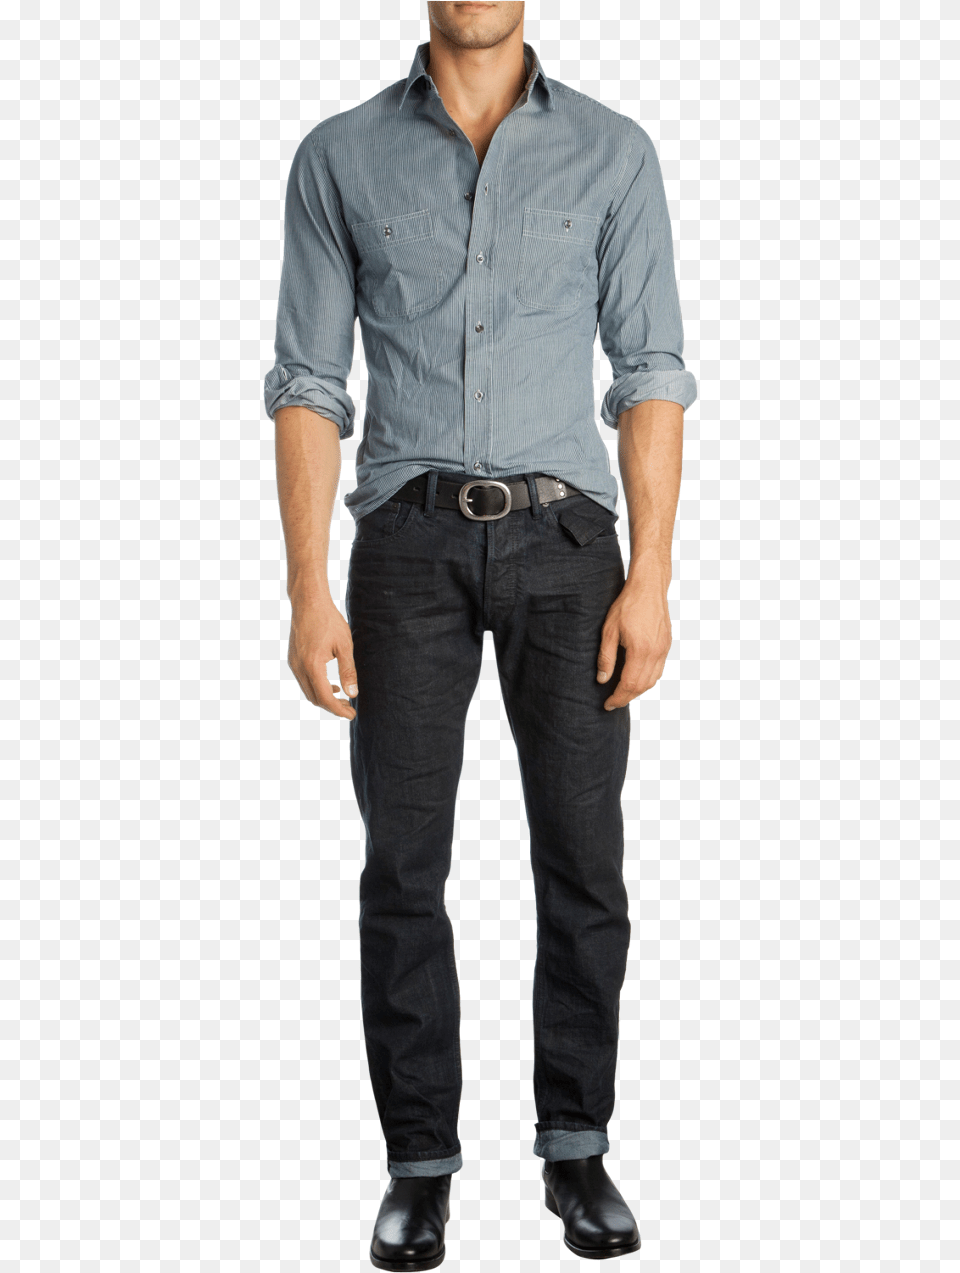 Outfit Con Camisa Fajada, Jeans, Pants, Clothing, Shirt Png Image